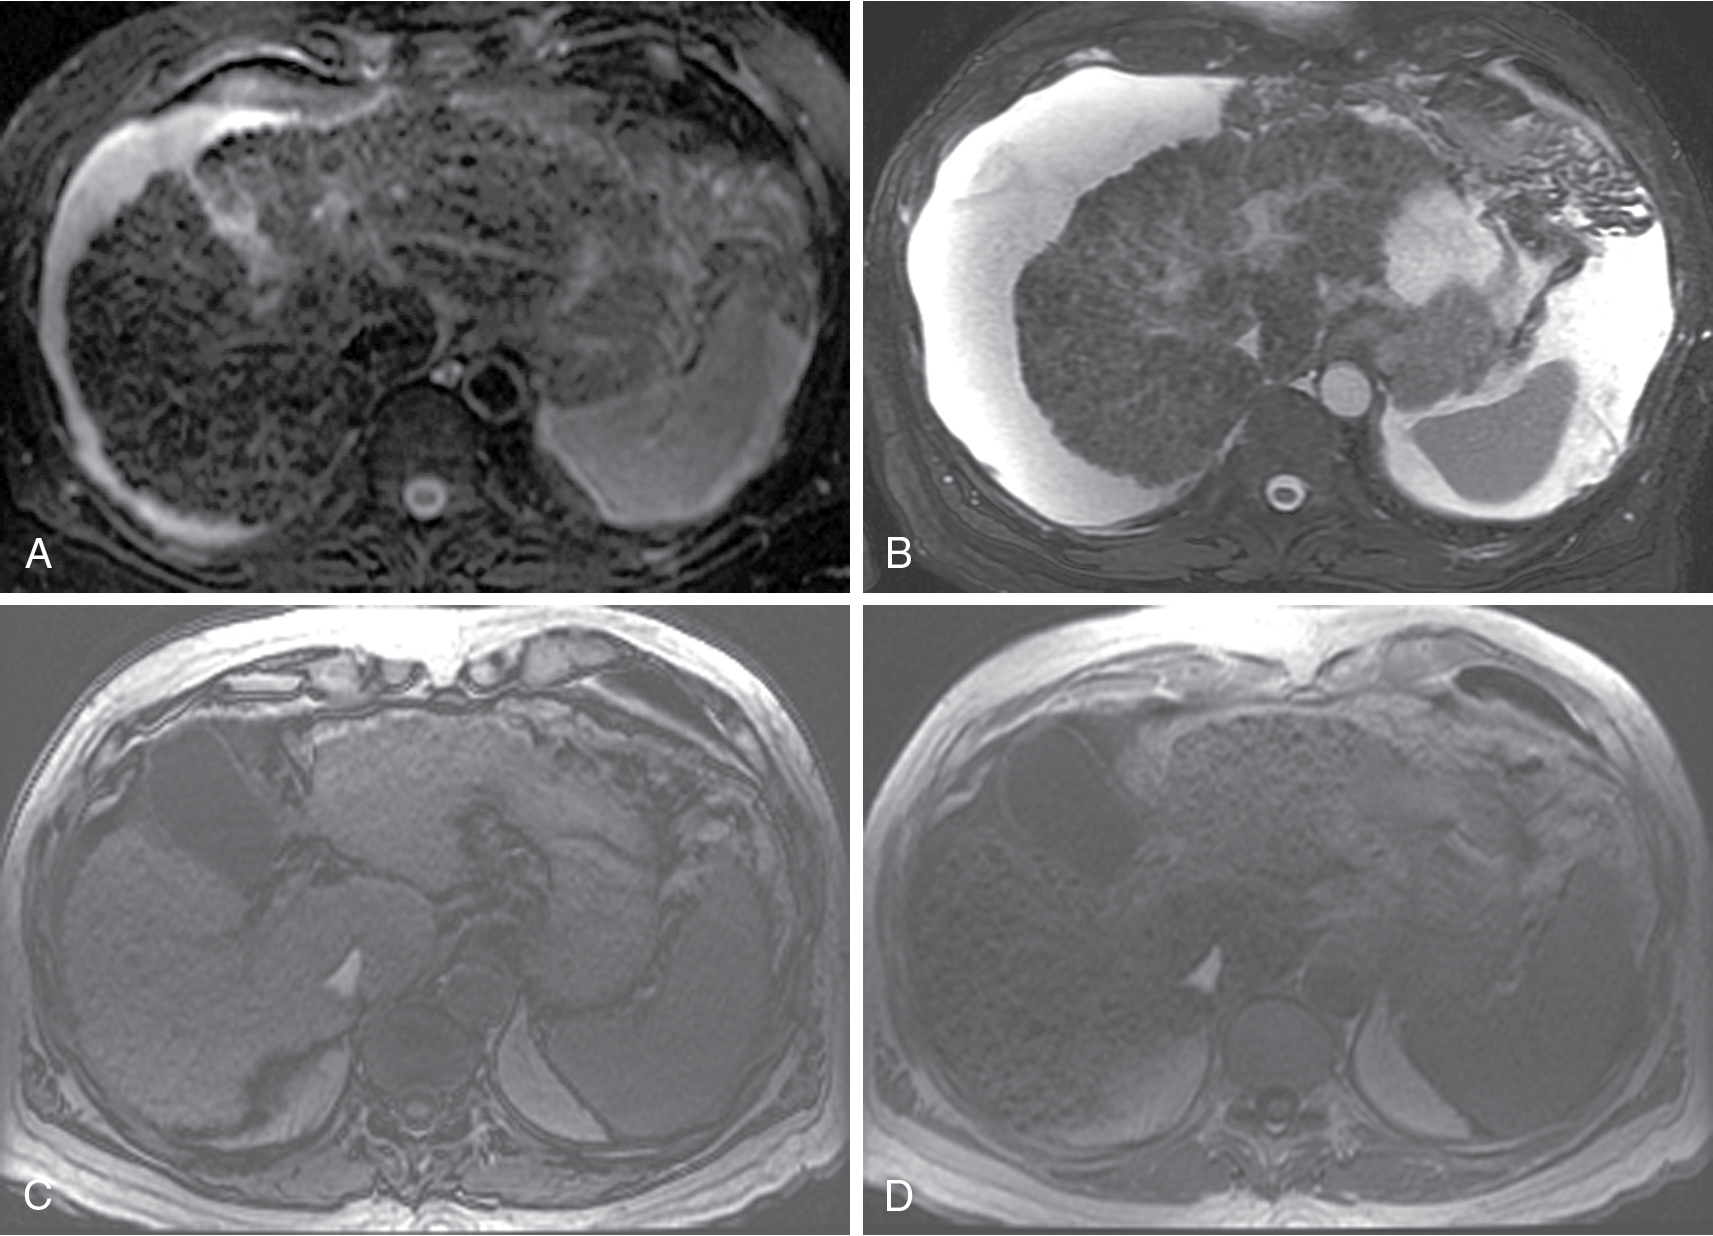 Fig. 15.1, Parenchymal nodularity with bridging bands of fibrosis. The axial, moderately T2-weighted, fat-suppressed images at baseline (A) and follow-up (B) portray advanced cirrhosis reflected by diffuse nodularity with intervening reticular hyperintensity, corresponding to fibrosis with worsening ascites. Comparing the out of-phase (C) with the in-phase (D) images reveals susceptibility artifact arising from the parenchymal (siderotic) nodules because of their iron content.